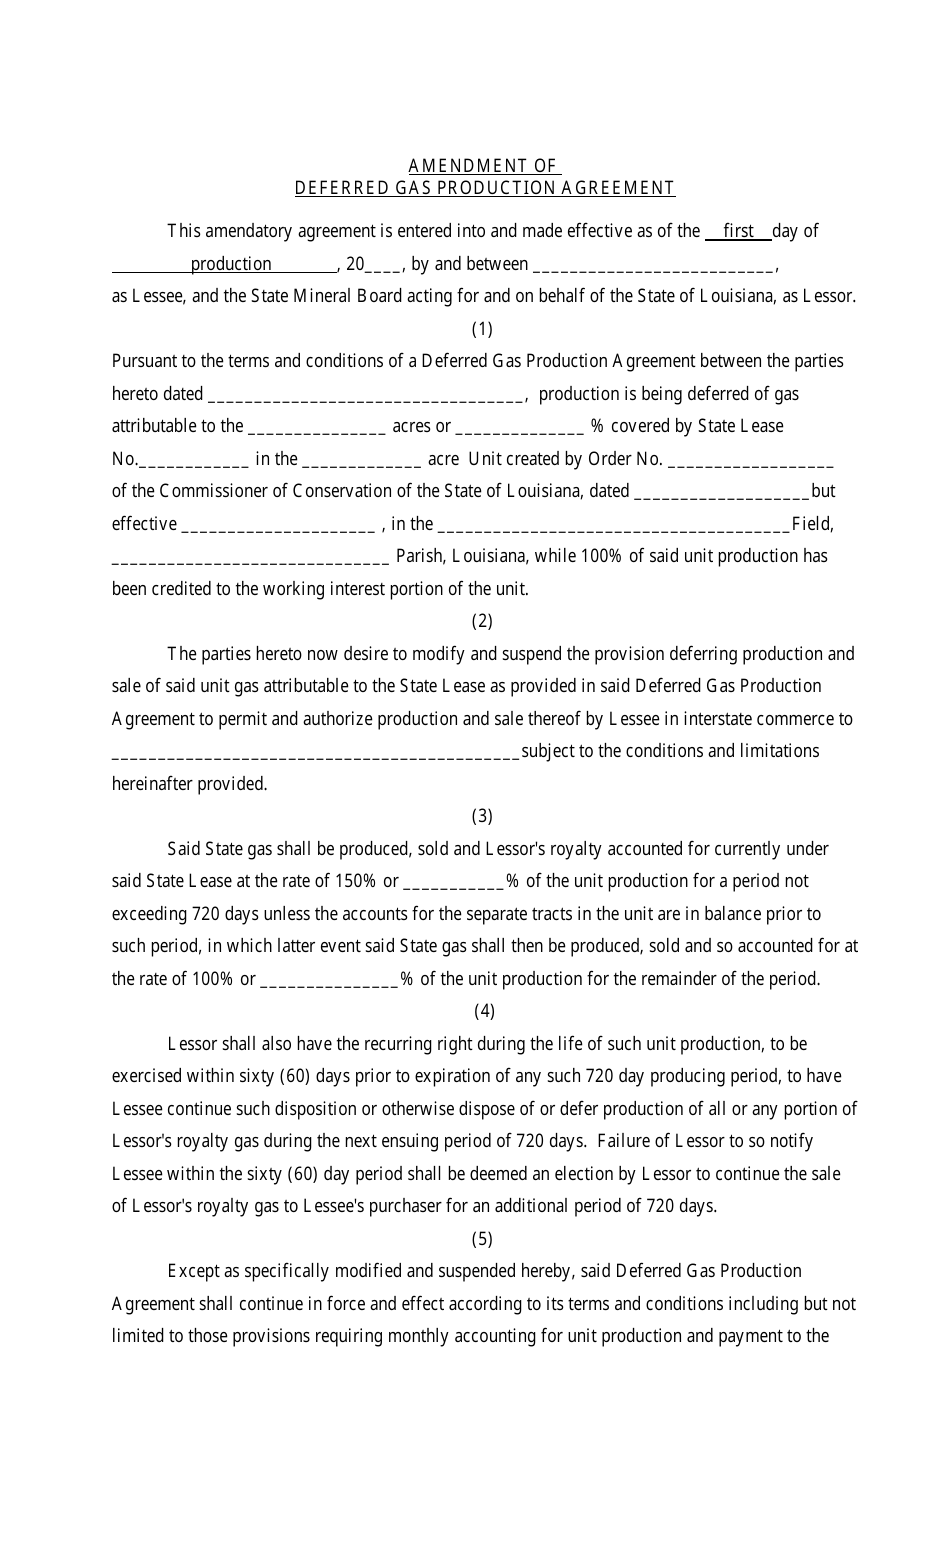 Amendment of Deferred Gas Production Agreement - Louisiana, Page 1